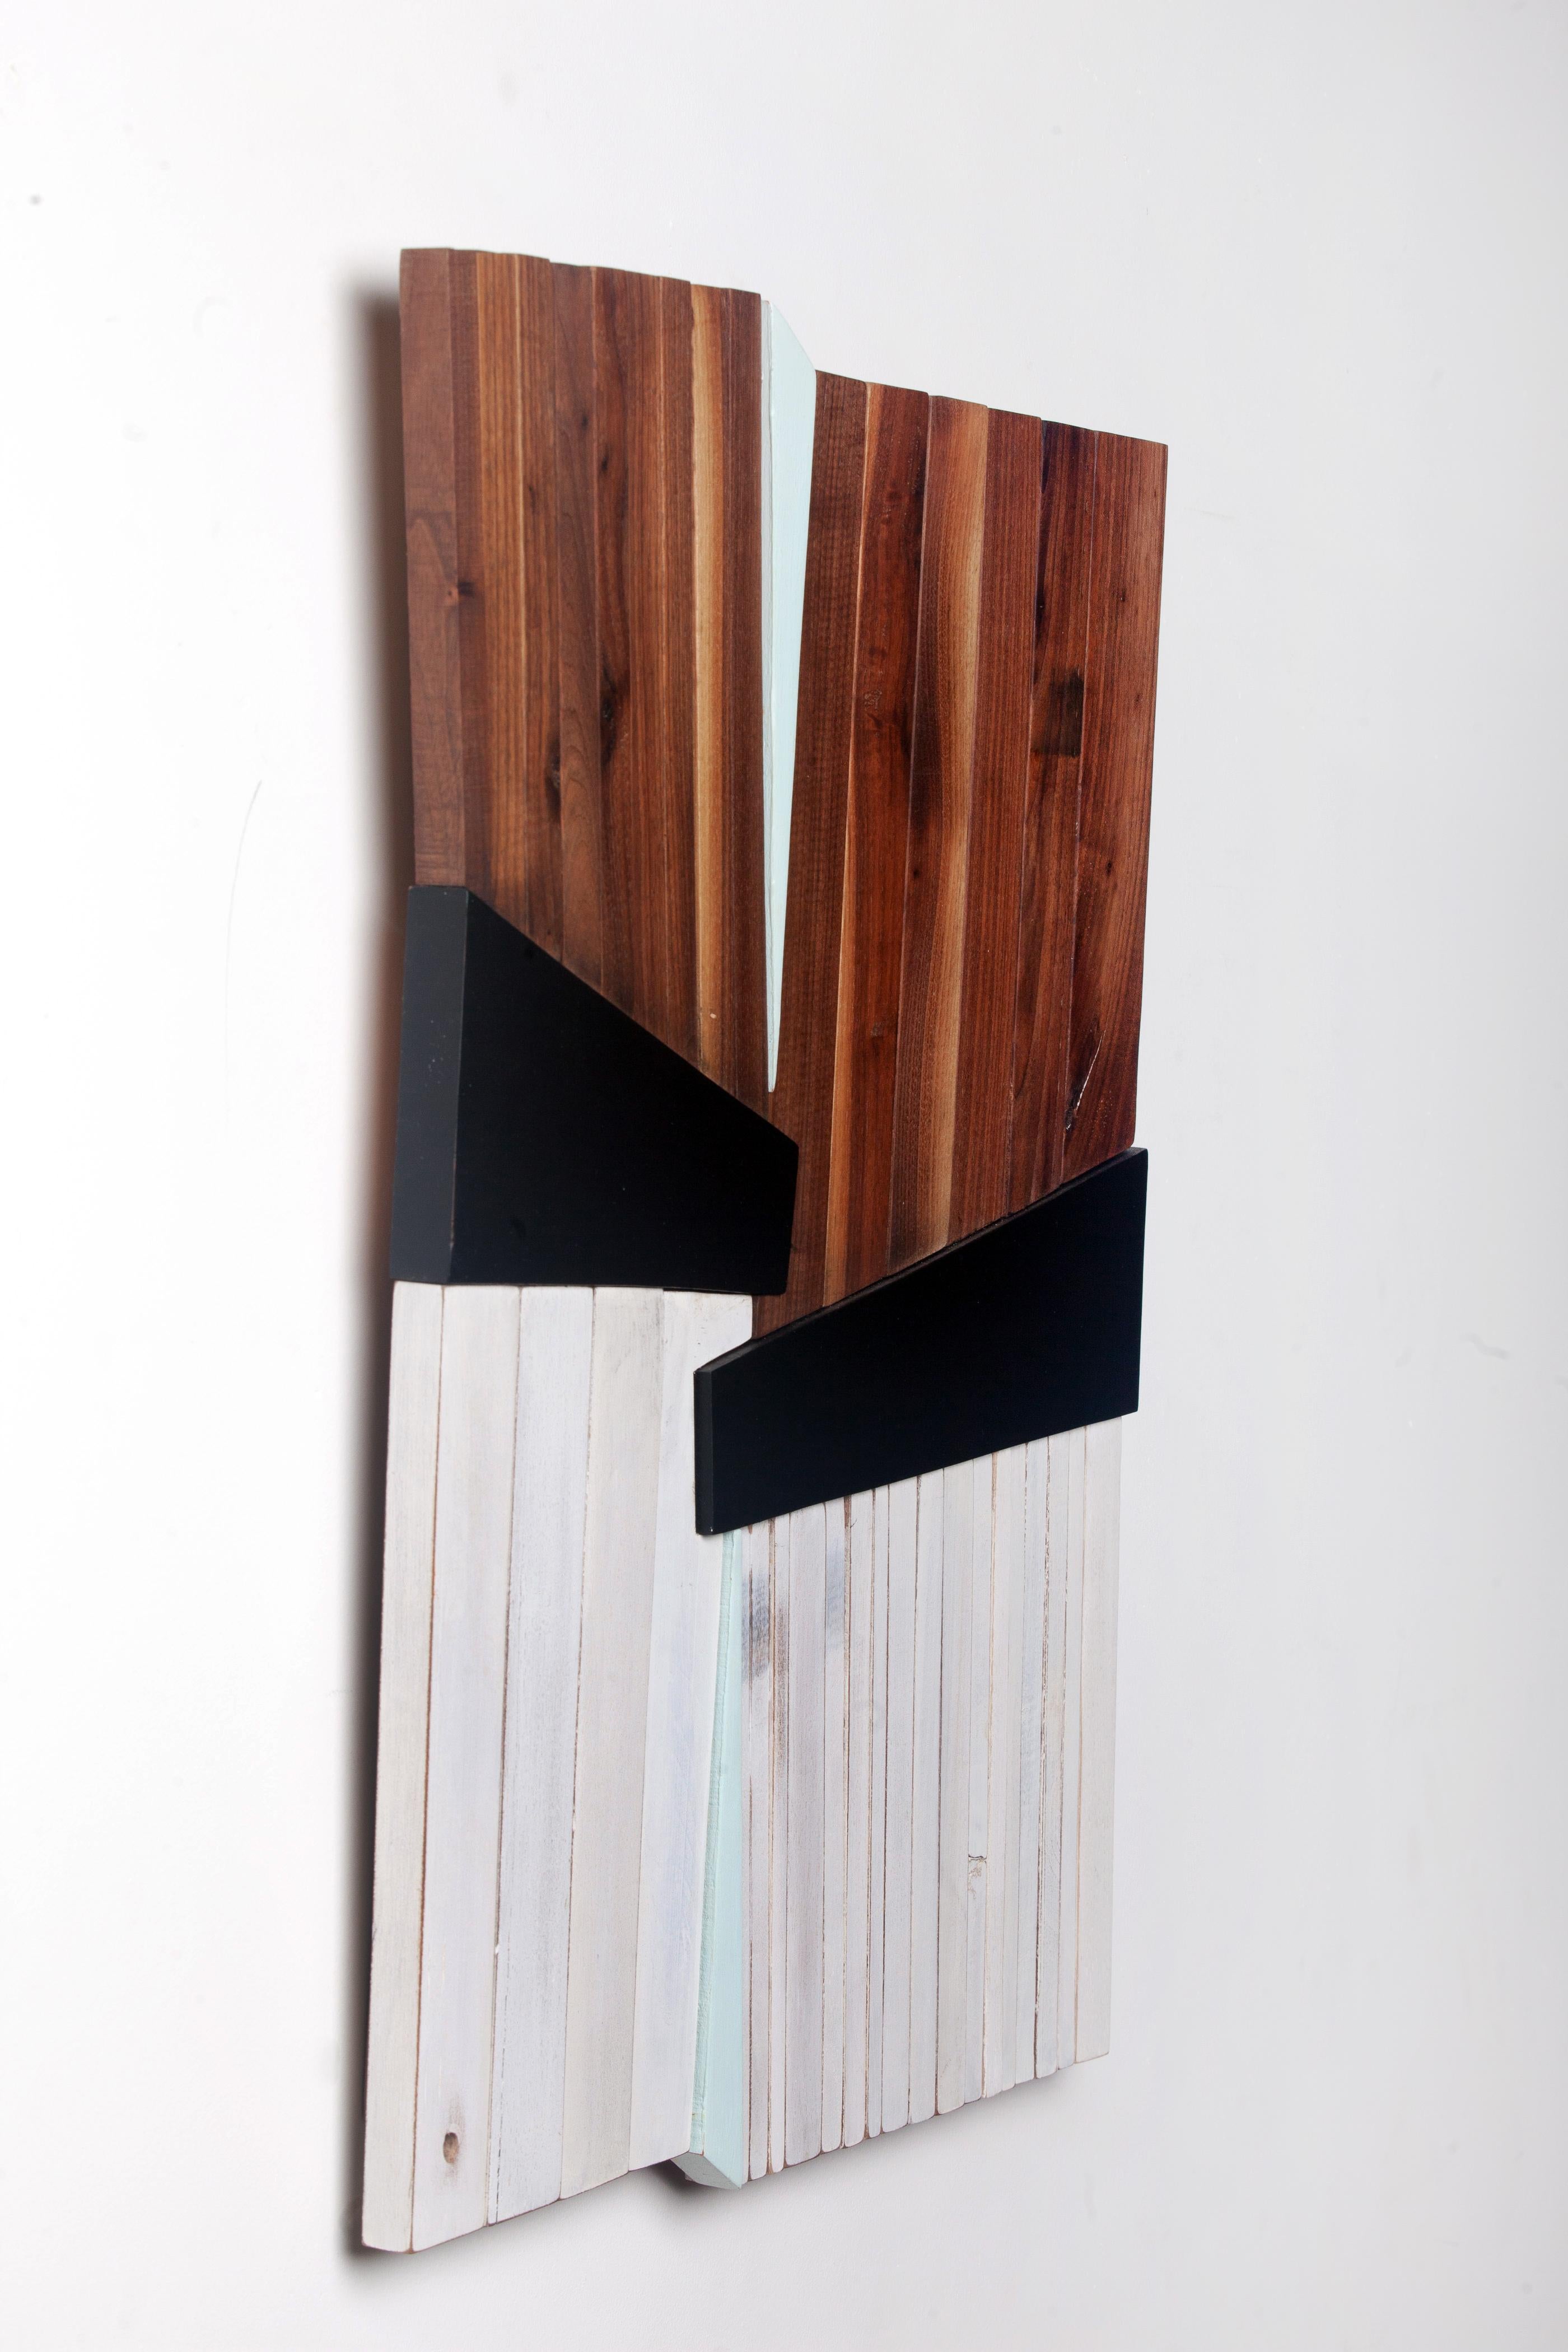 <p>Artist Comments<br />New Hope is a modern, minimalistic rustic wood wall sculpture.  The piece is made with walnut that was supposed to be made into gun stocks from a large firearms manufacturer but did not have enough curly grain.  So instead of